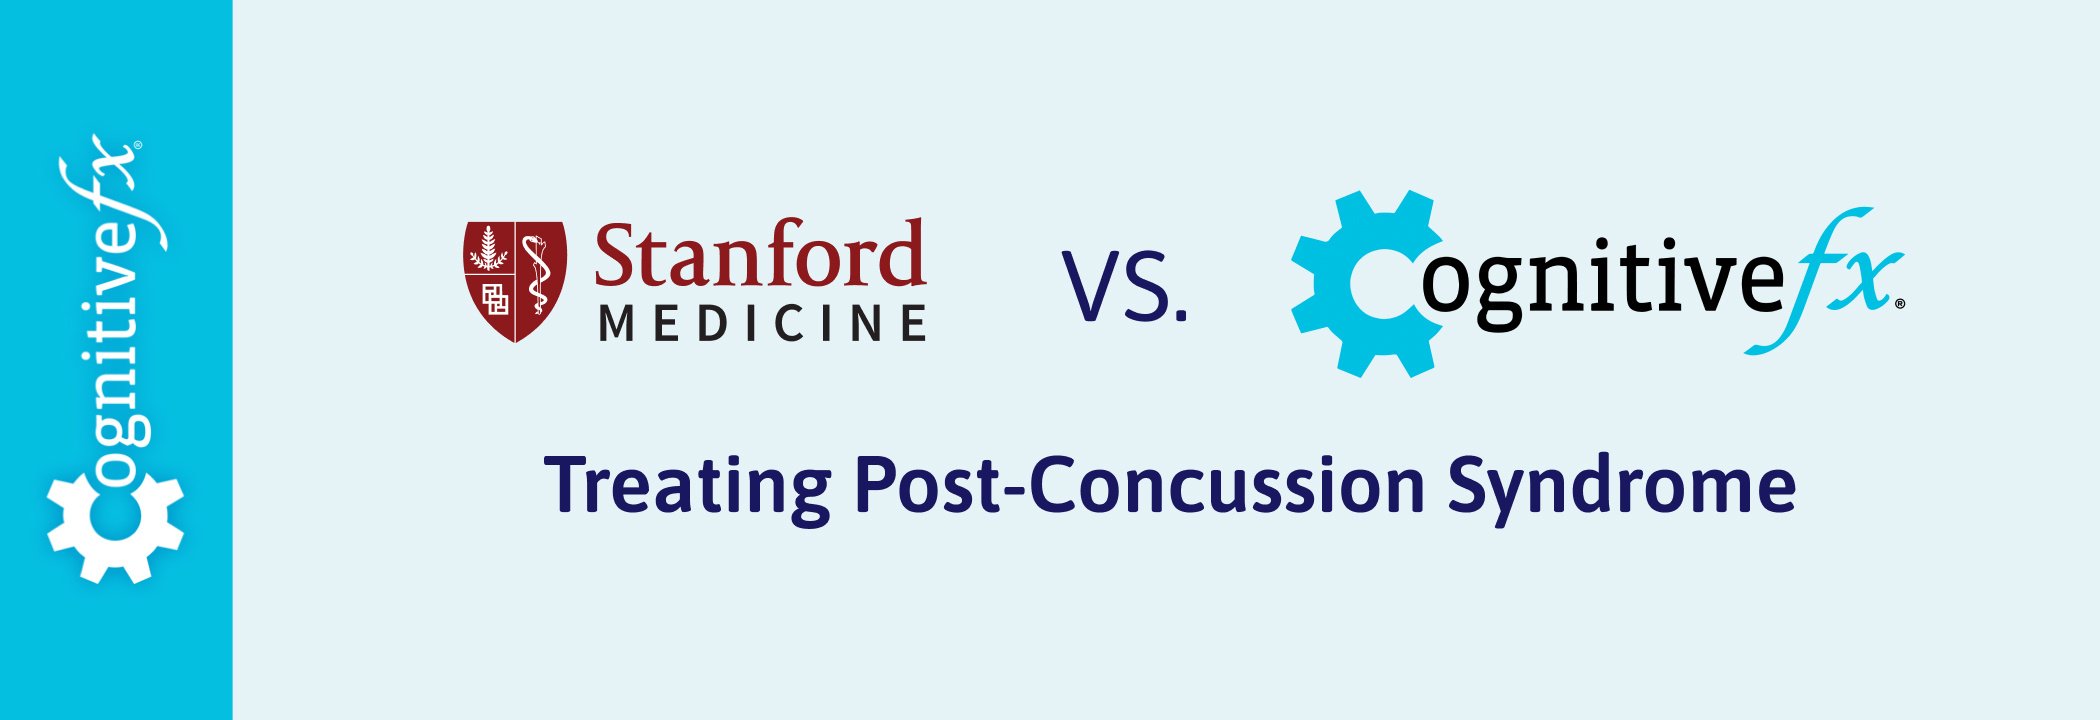 Stanford Concussion Clinic vs. Cognitive FX for Treating Post-Concussion Syndrome